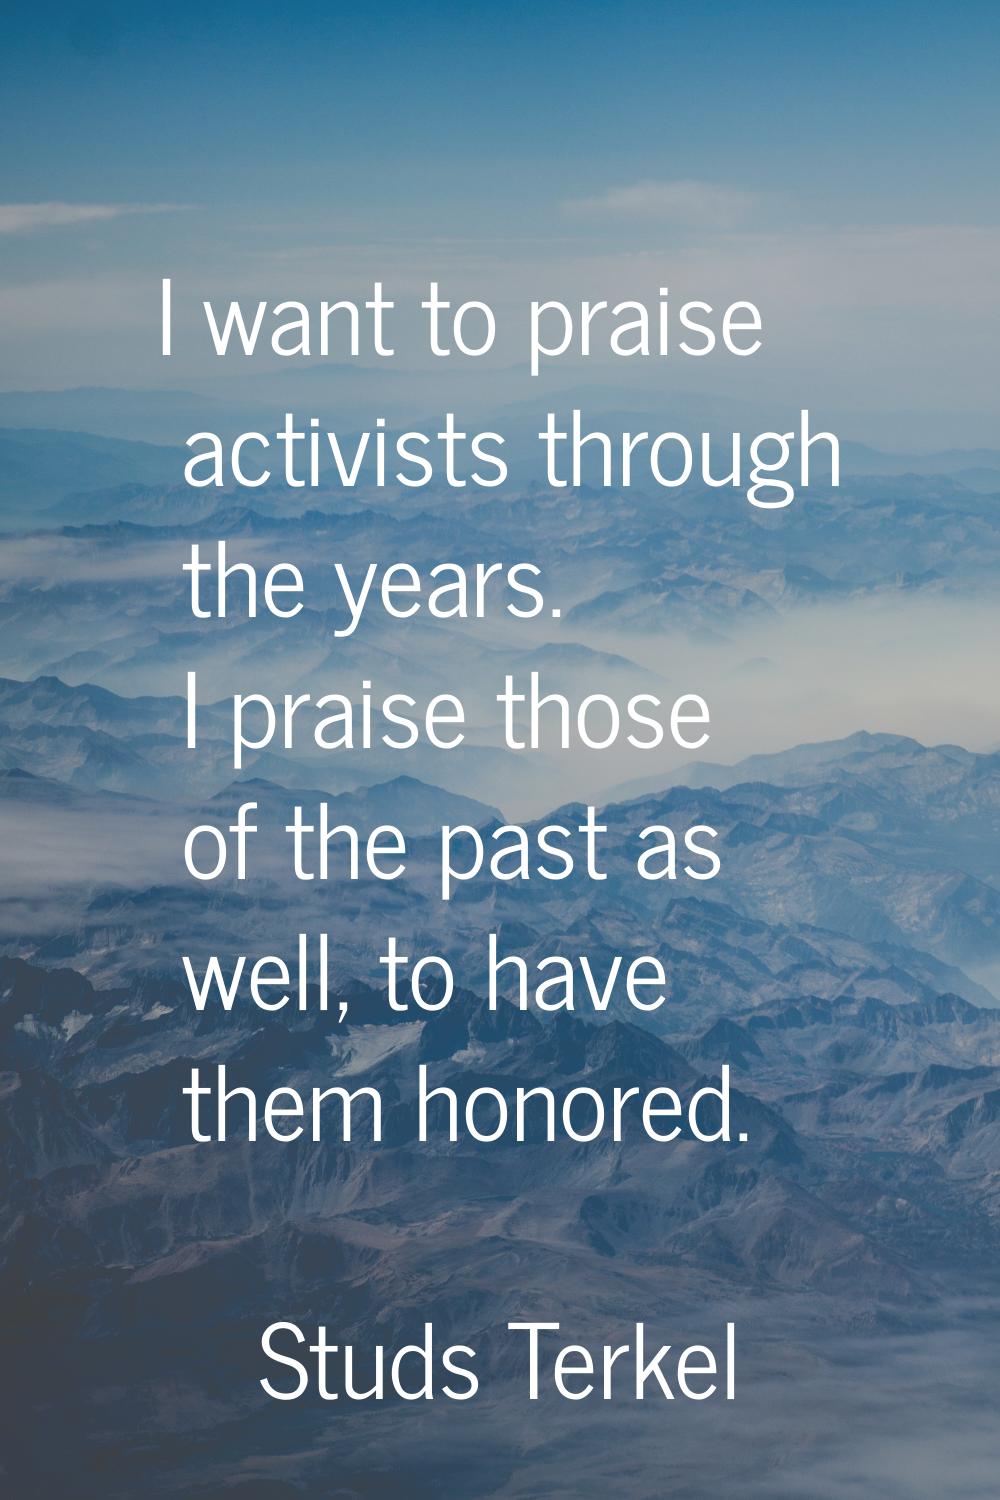 I want to praise activists through the years. I praise those of the past as well, to have them hono